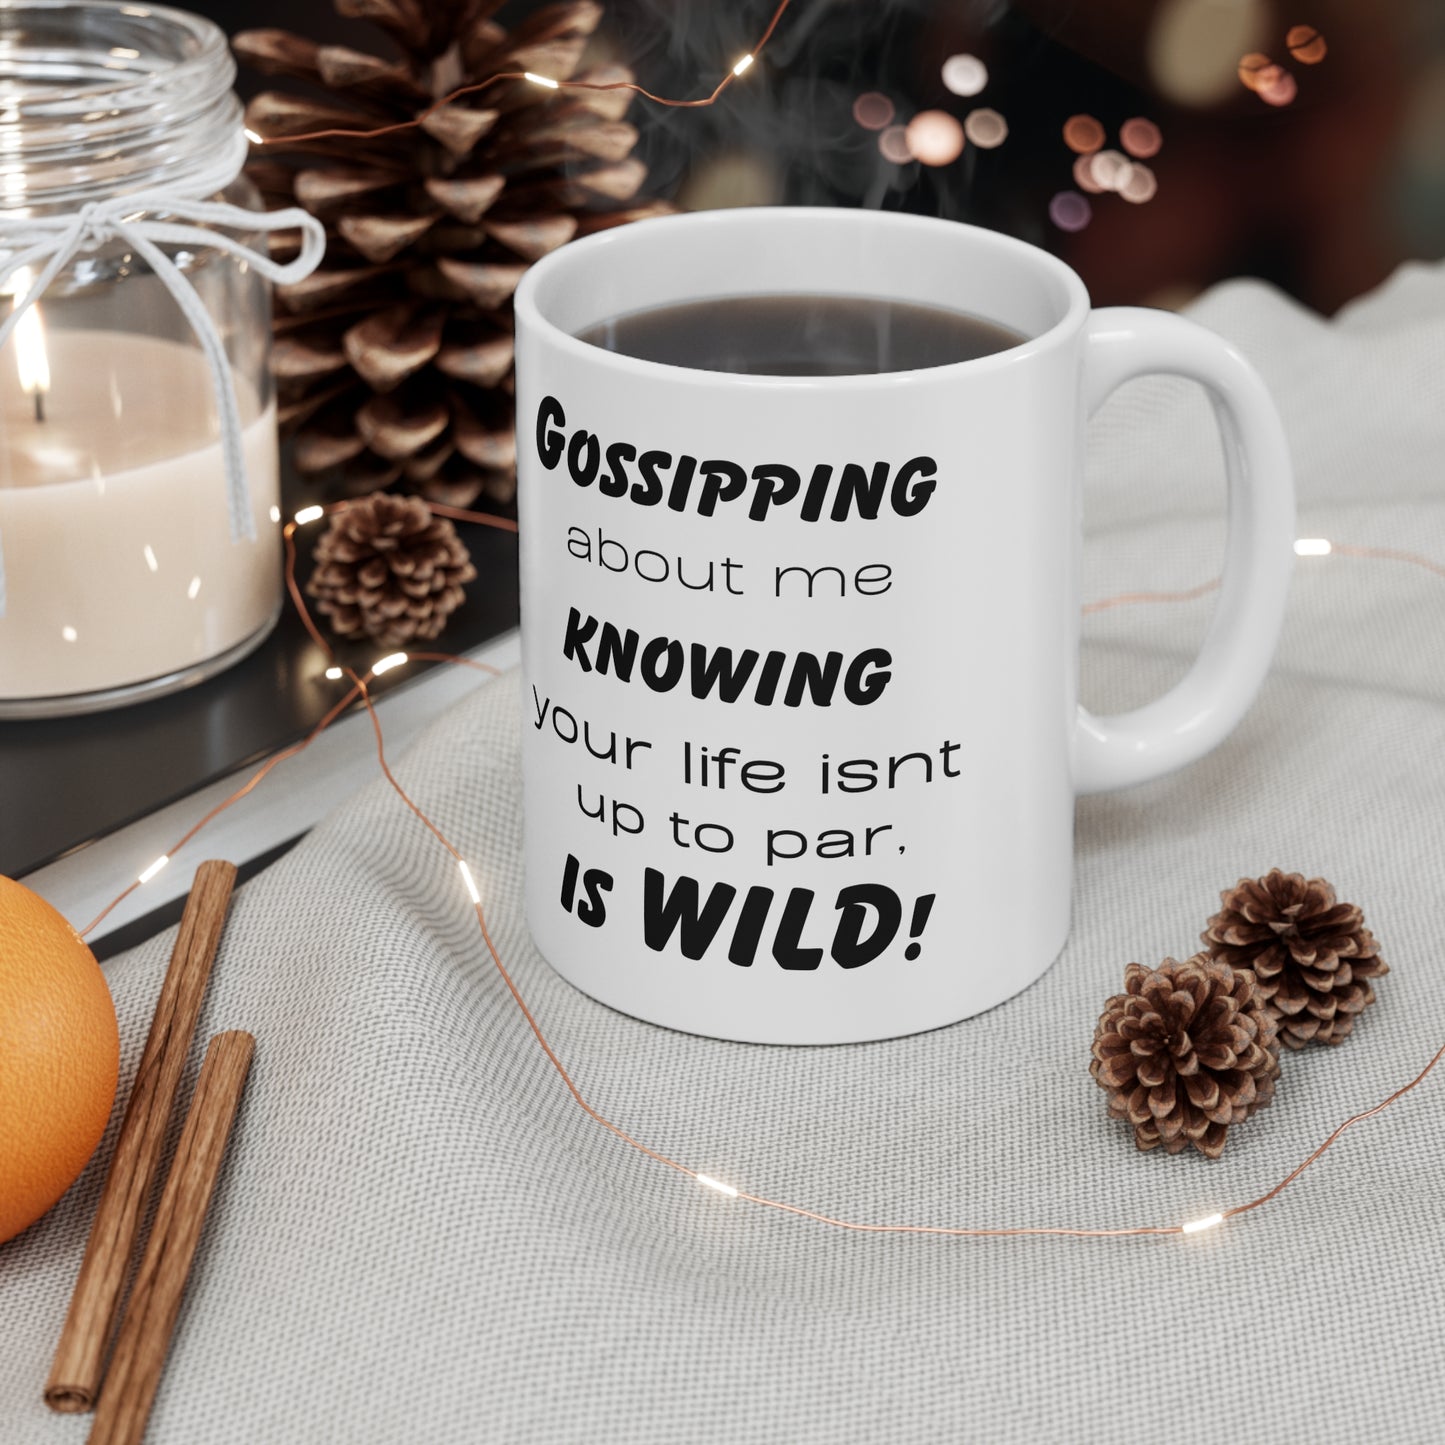 Gossiping about my life, knowing yours is not up to par is WILD! Ceramic Mug 11oz